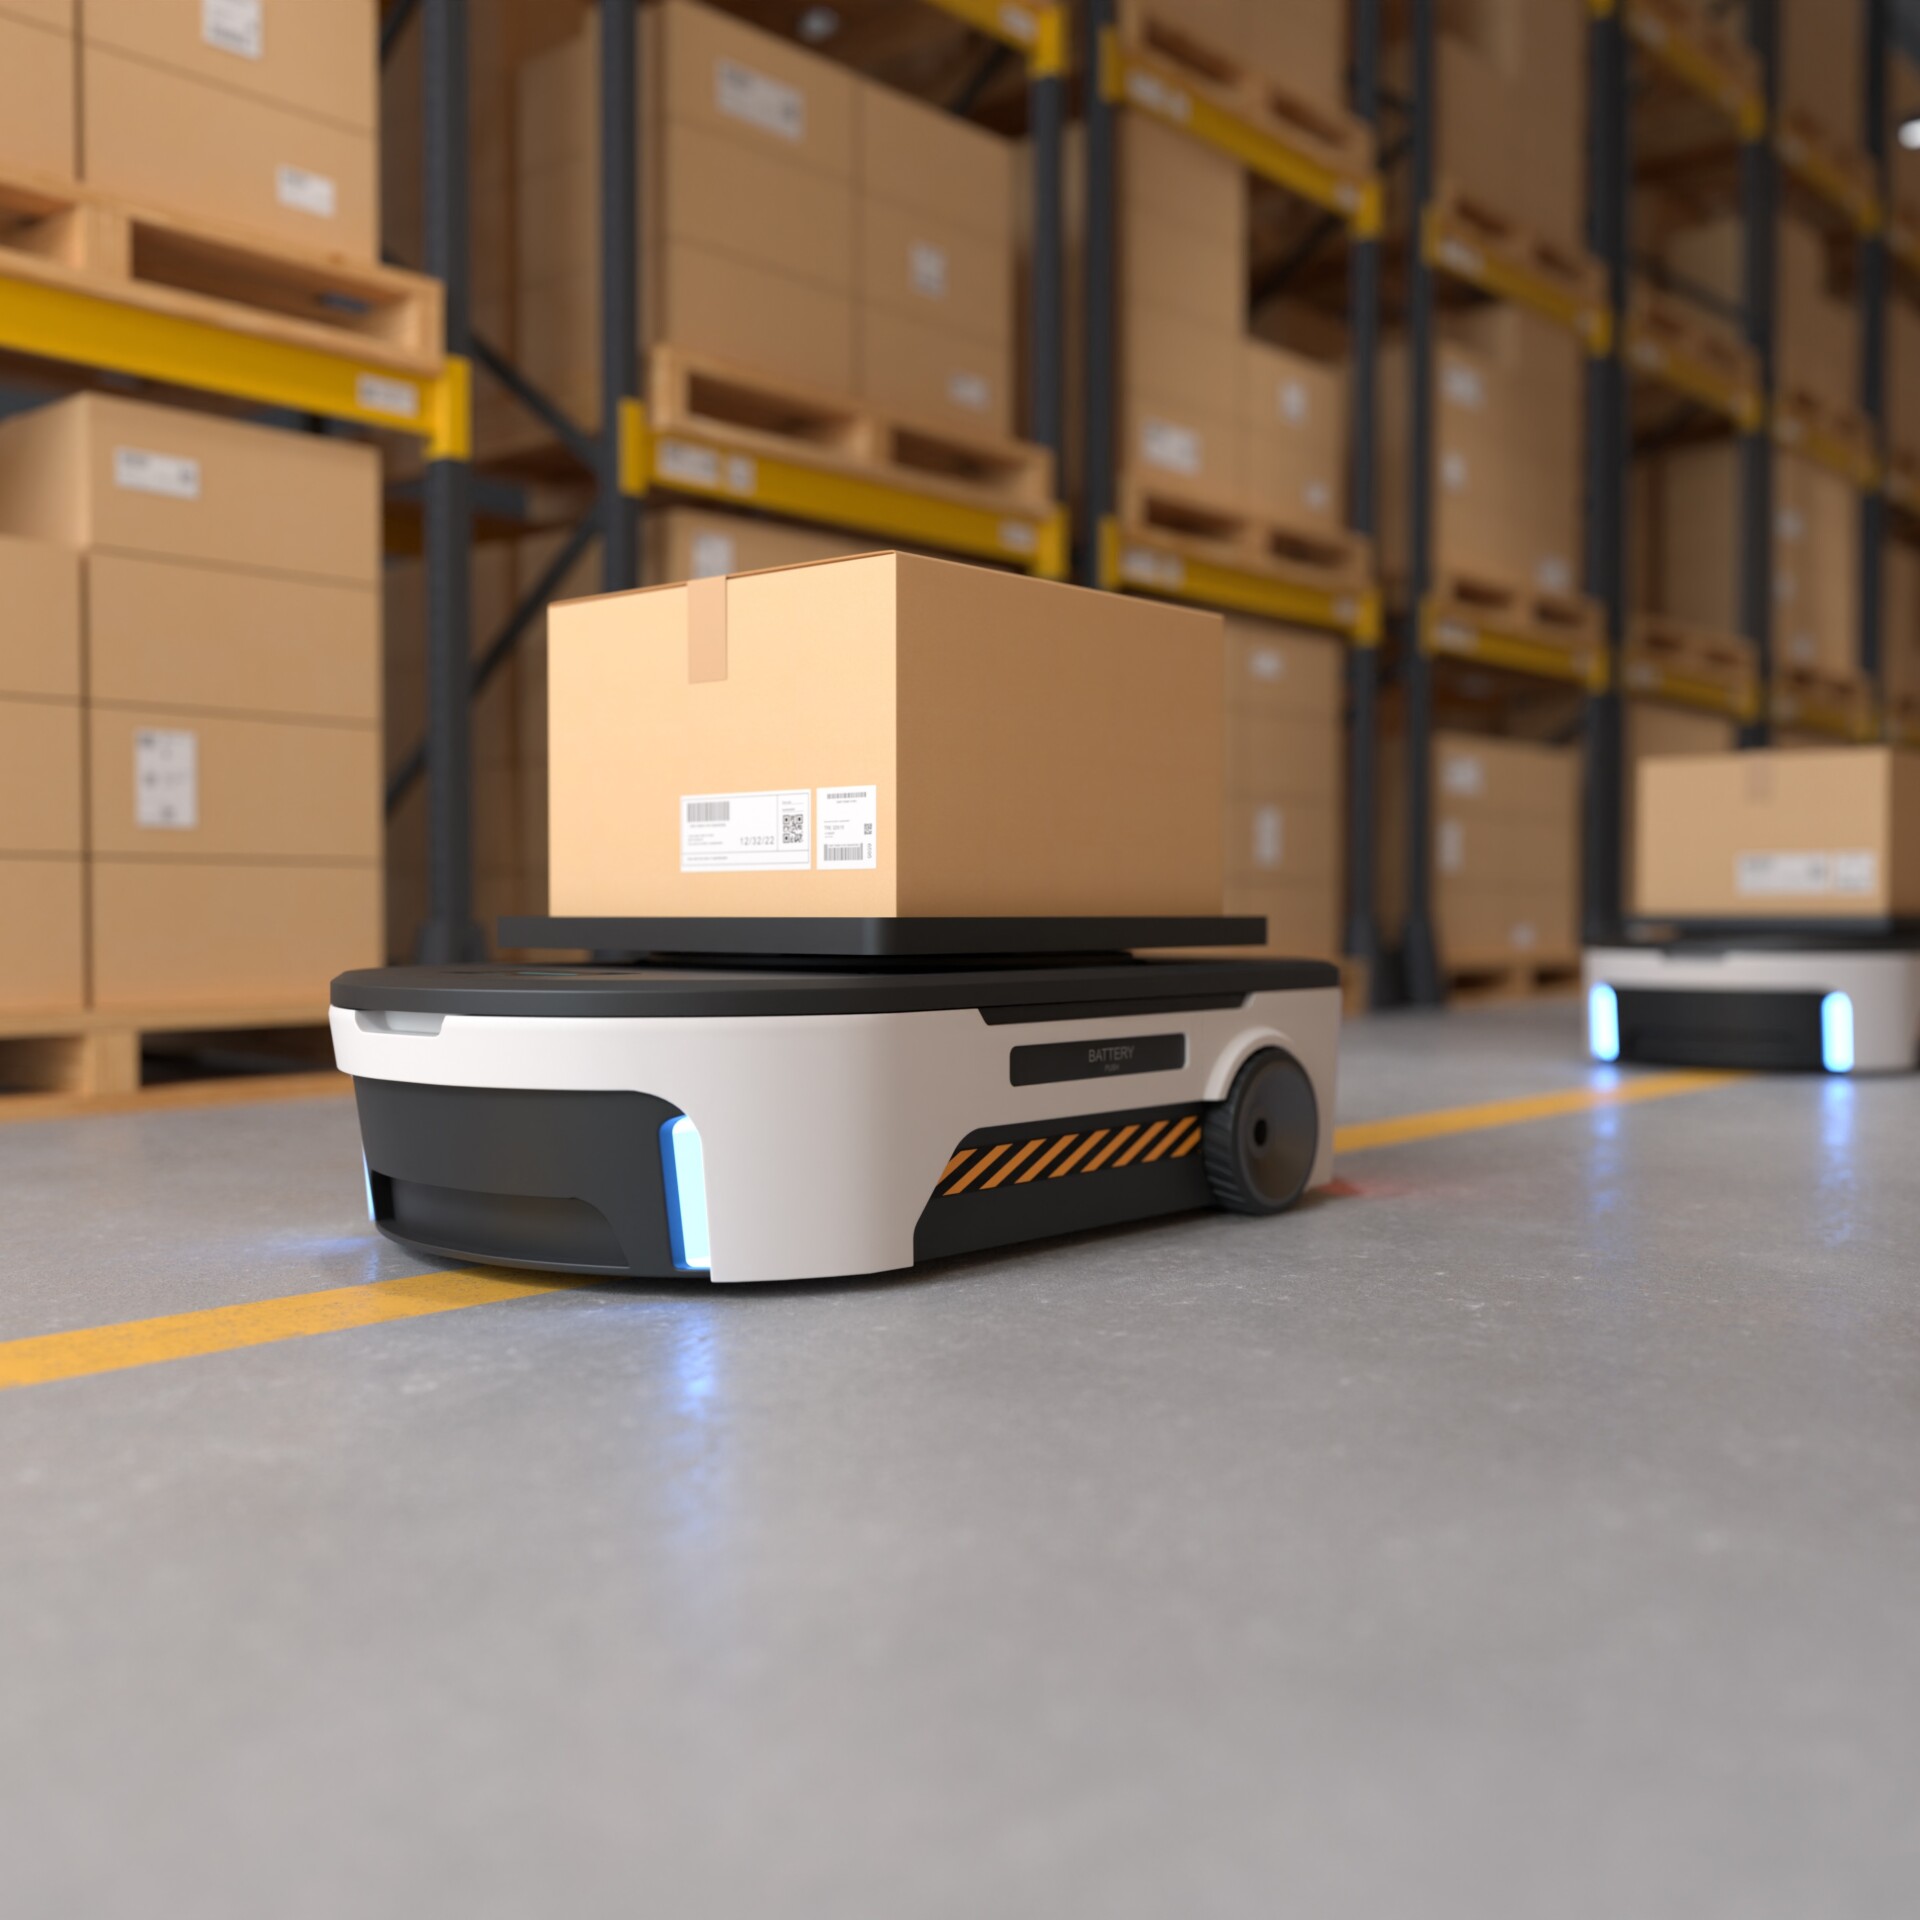 Mobile robots in a warehouse